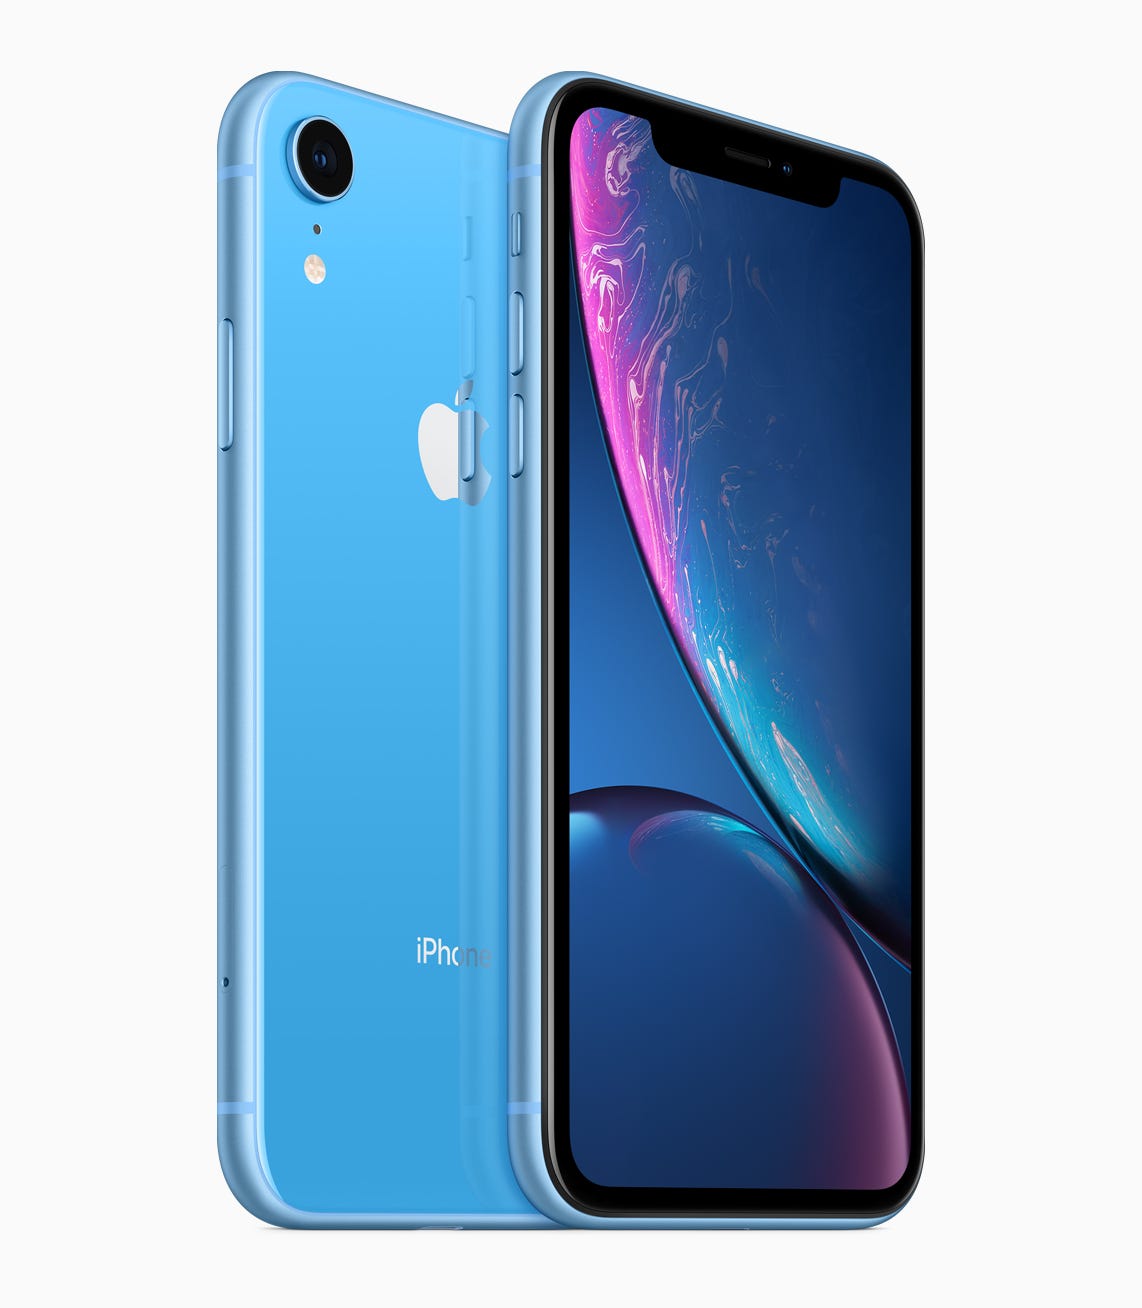 Apple just introduced the iPhone XR, a $749 iPhone with a ...